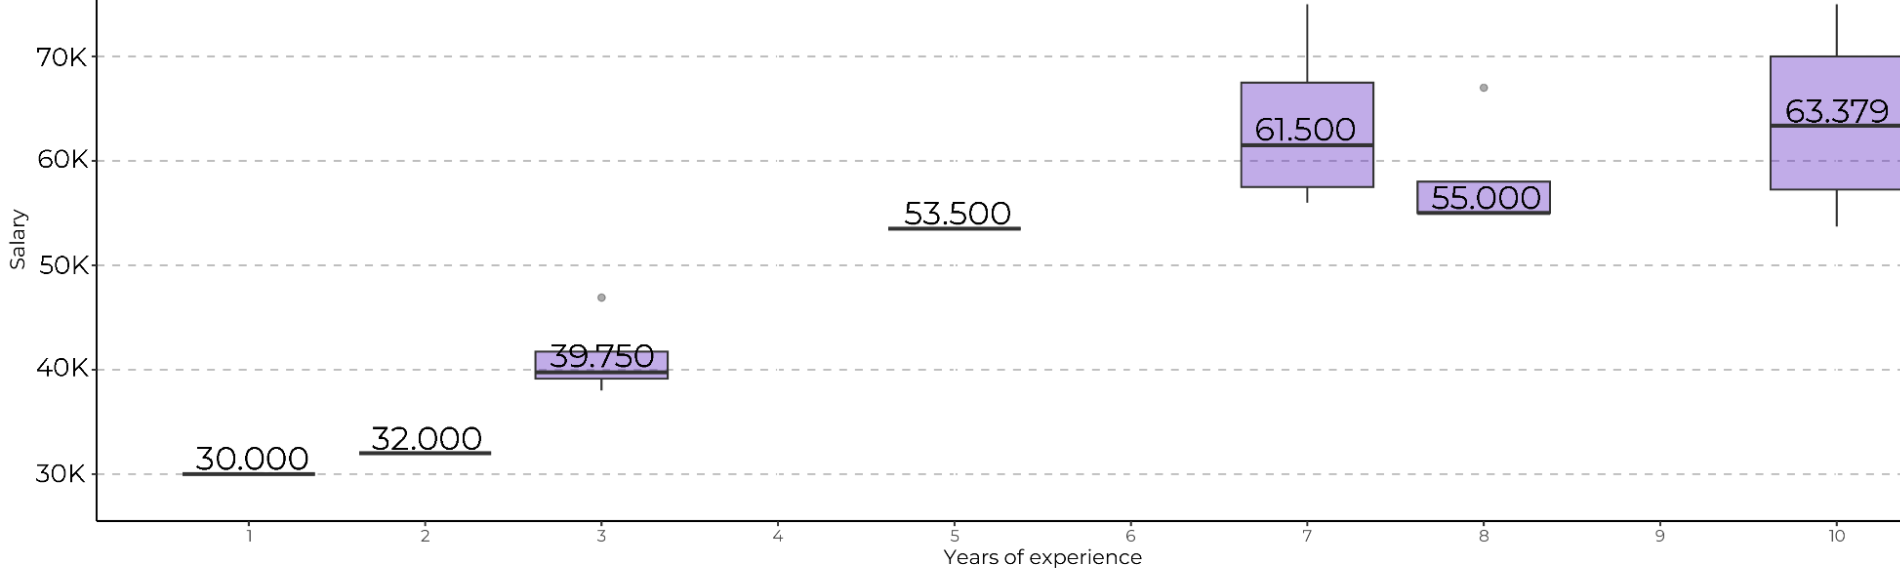 Graph showing salary ranges by years of experience for Managers.